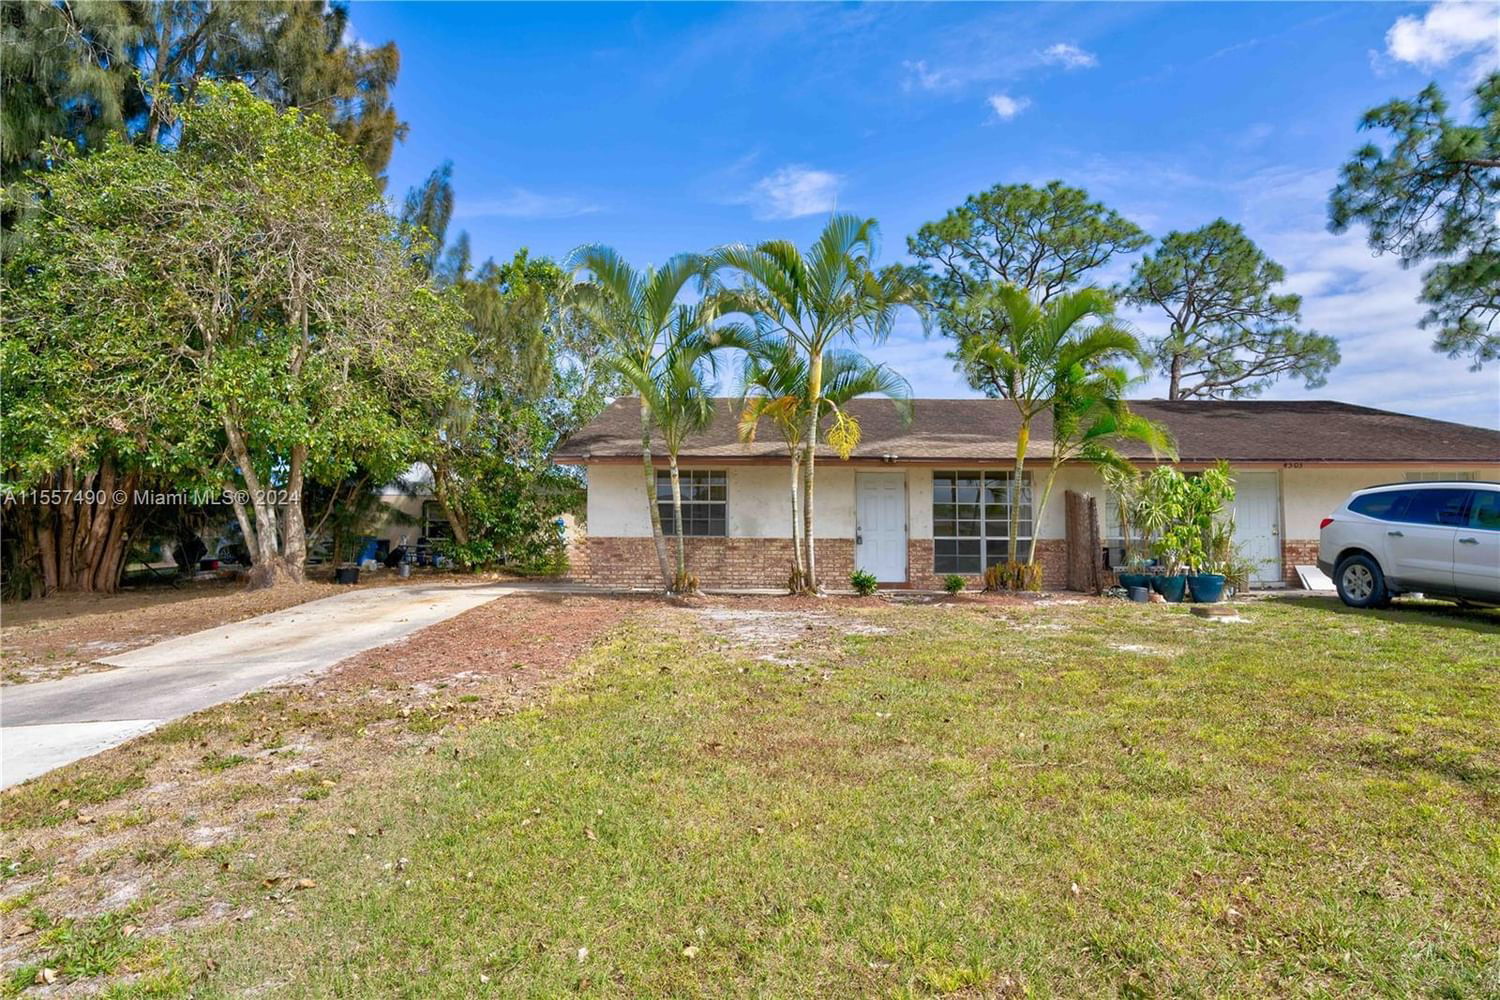 Real estate property located at 96 Norfolk Blvd, Martin County, FISHERMANS COVE, Stuart, FL